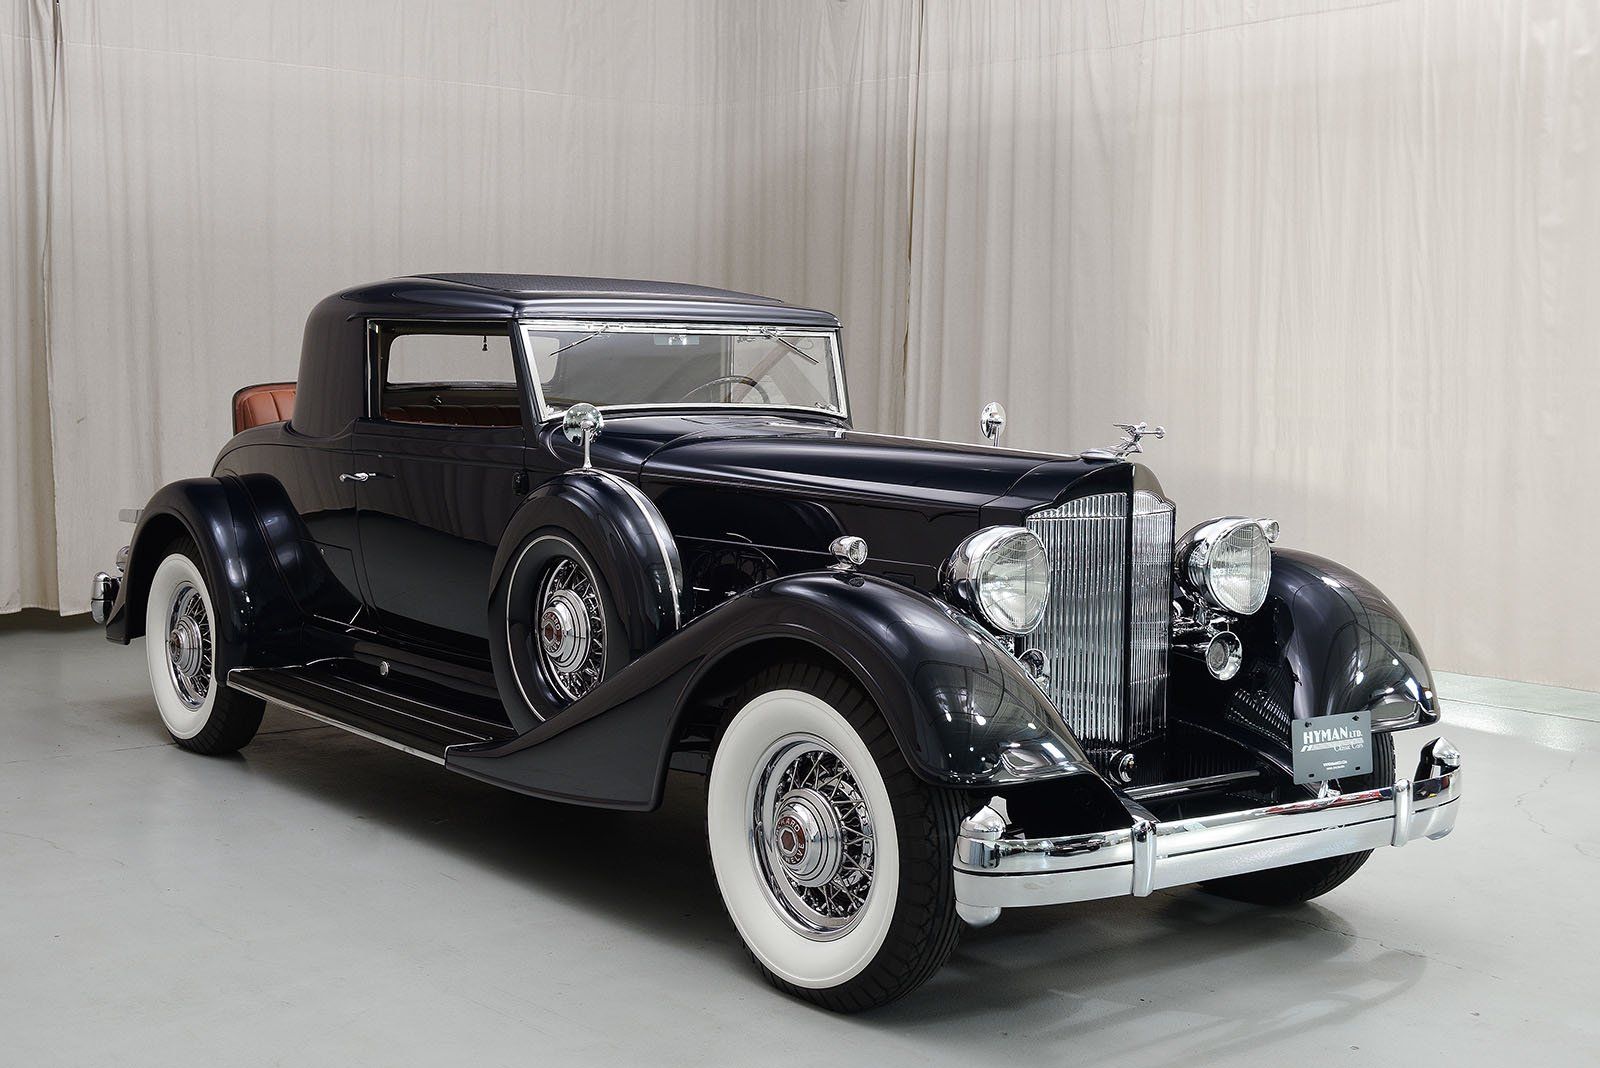 A Black 1934 Packard Twelve Coupe